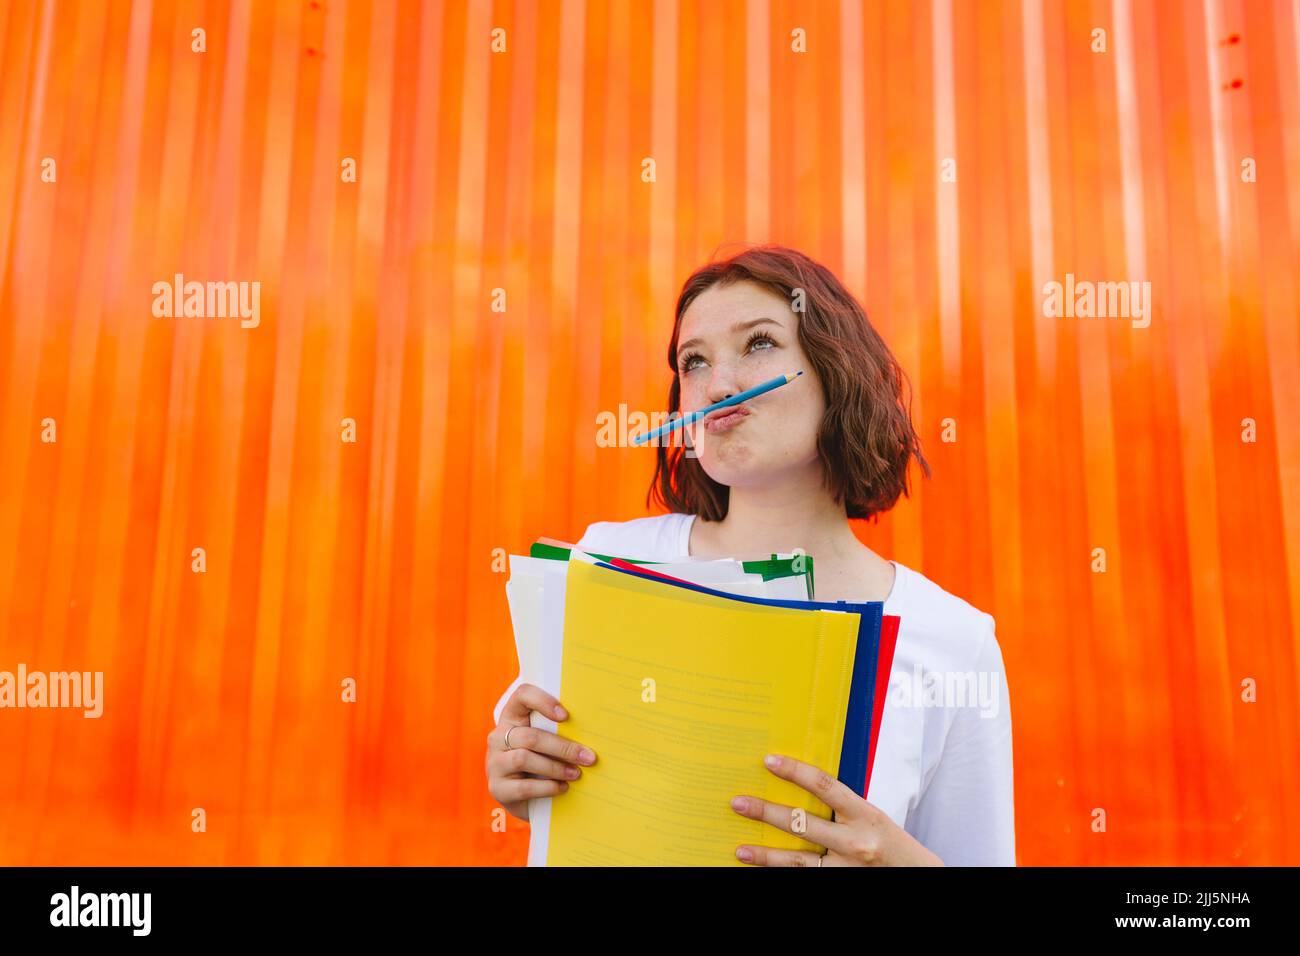 Teenage girl holding multi colored file folders puckering lips in front of orange cargo container Stock Photo